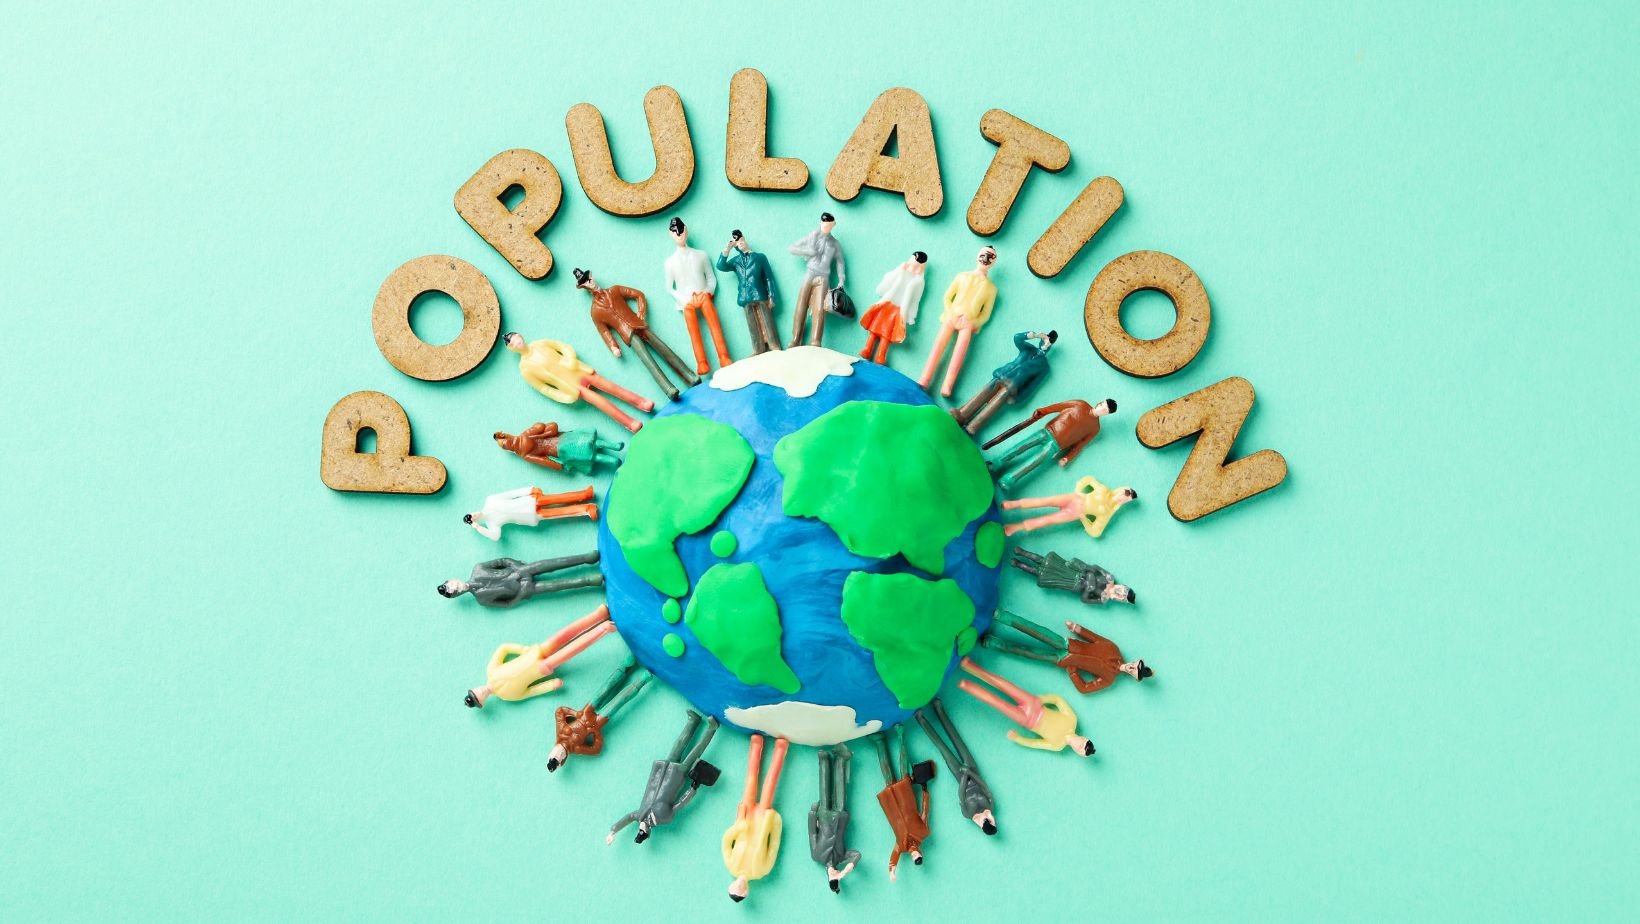 what is the most likely reason the agricultural revolution caused a population increase?